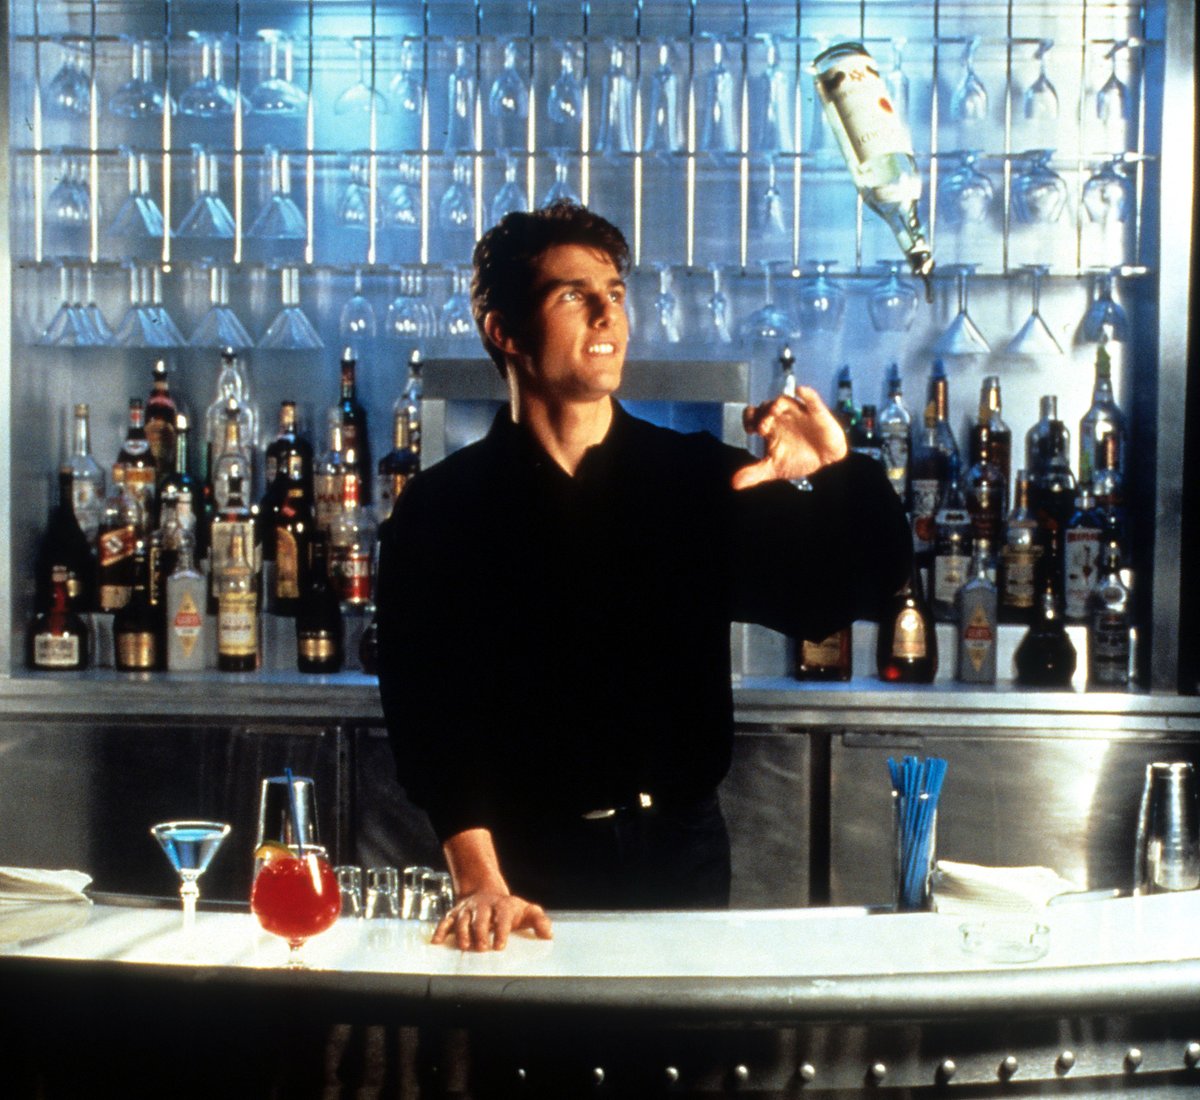 GREAT FOOD. GREAT DRINKS. GREAT CINEMA. We are open till MIDNIGHT, every night of the @InvFilmFest. Food + drinks till late. Join us this Fri 4 - Thu 10 Nov. ⚠️ Disclaimer: Tom Cruise is not working the bar.